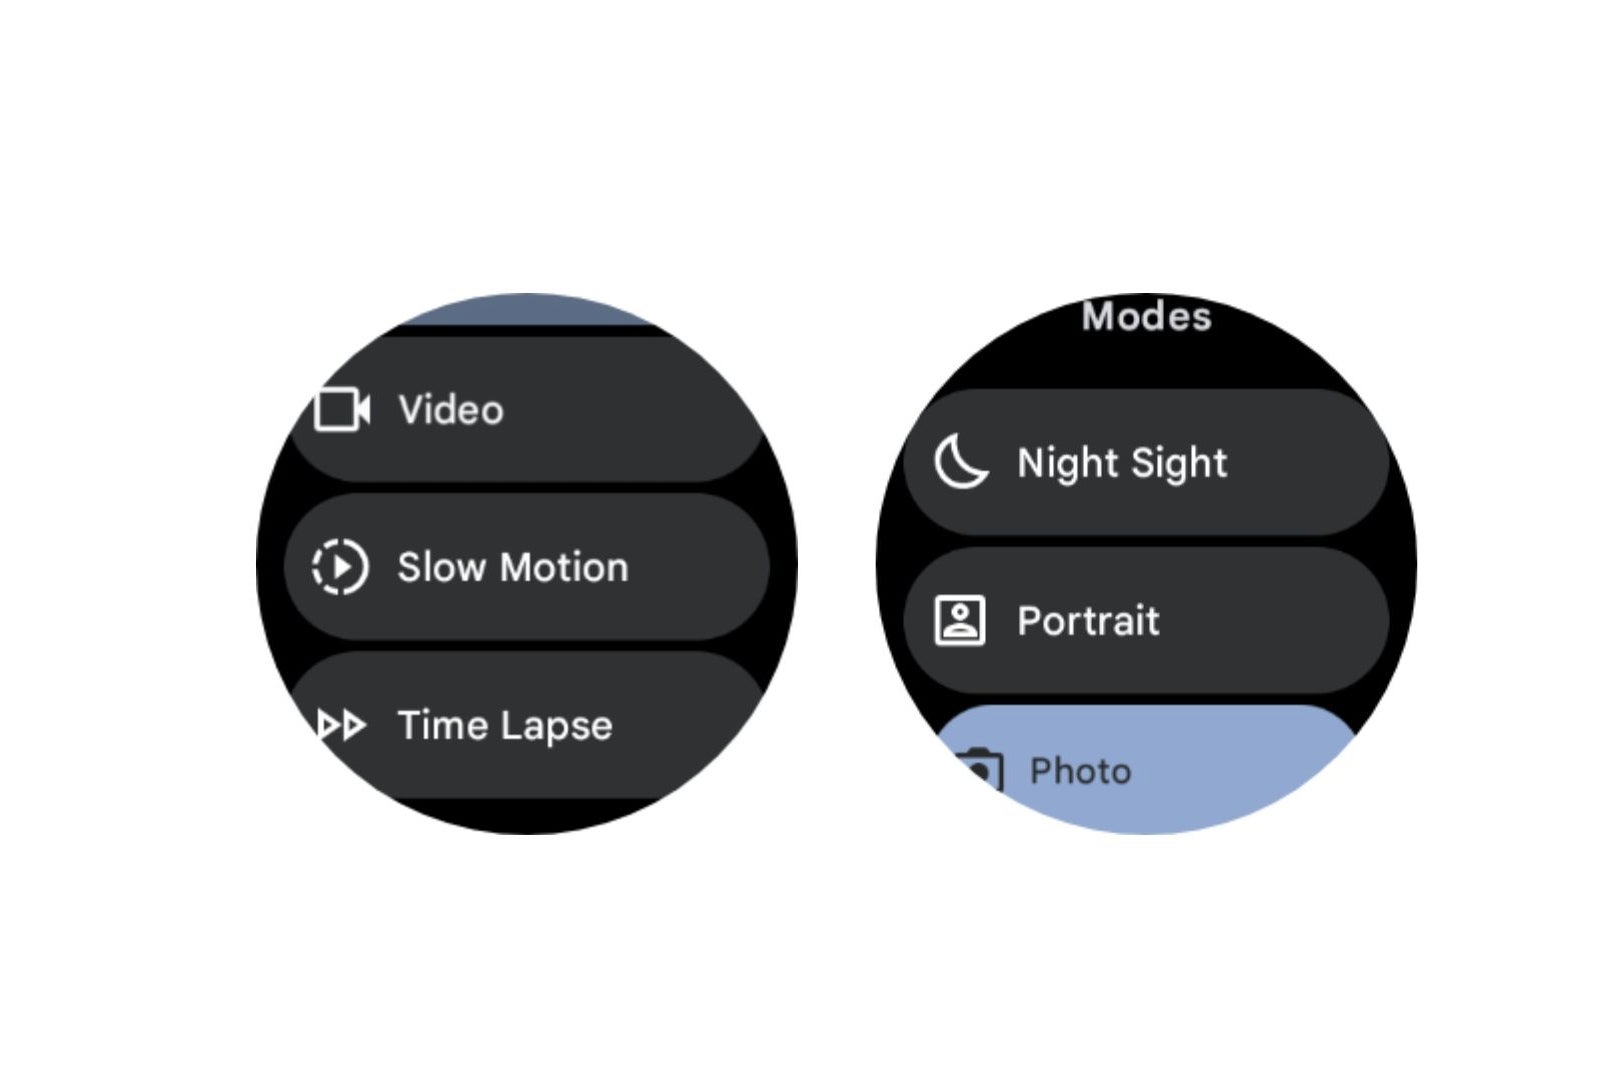 Image Credit – 9to5Google – Pixel Watch Camera app adds Night Sight, Video, Slow Motion and more